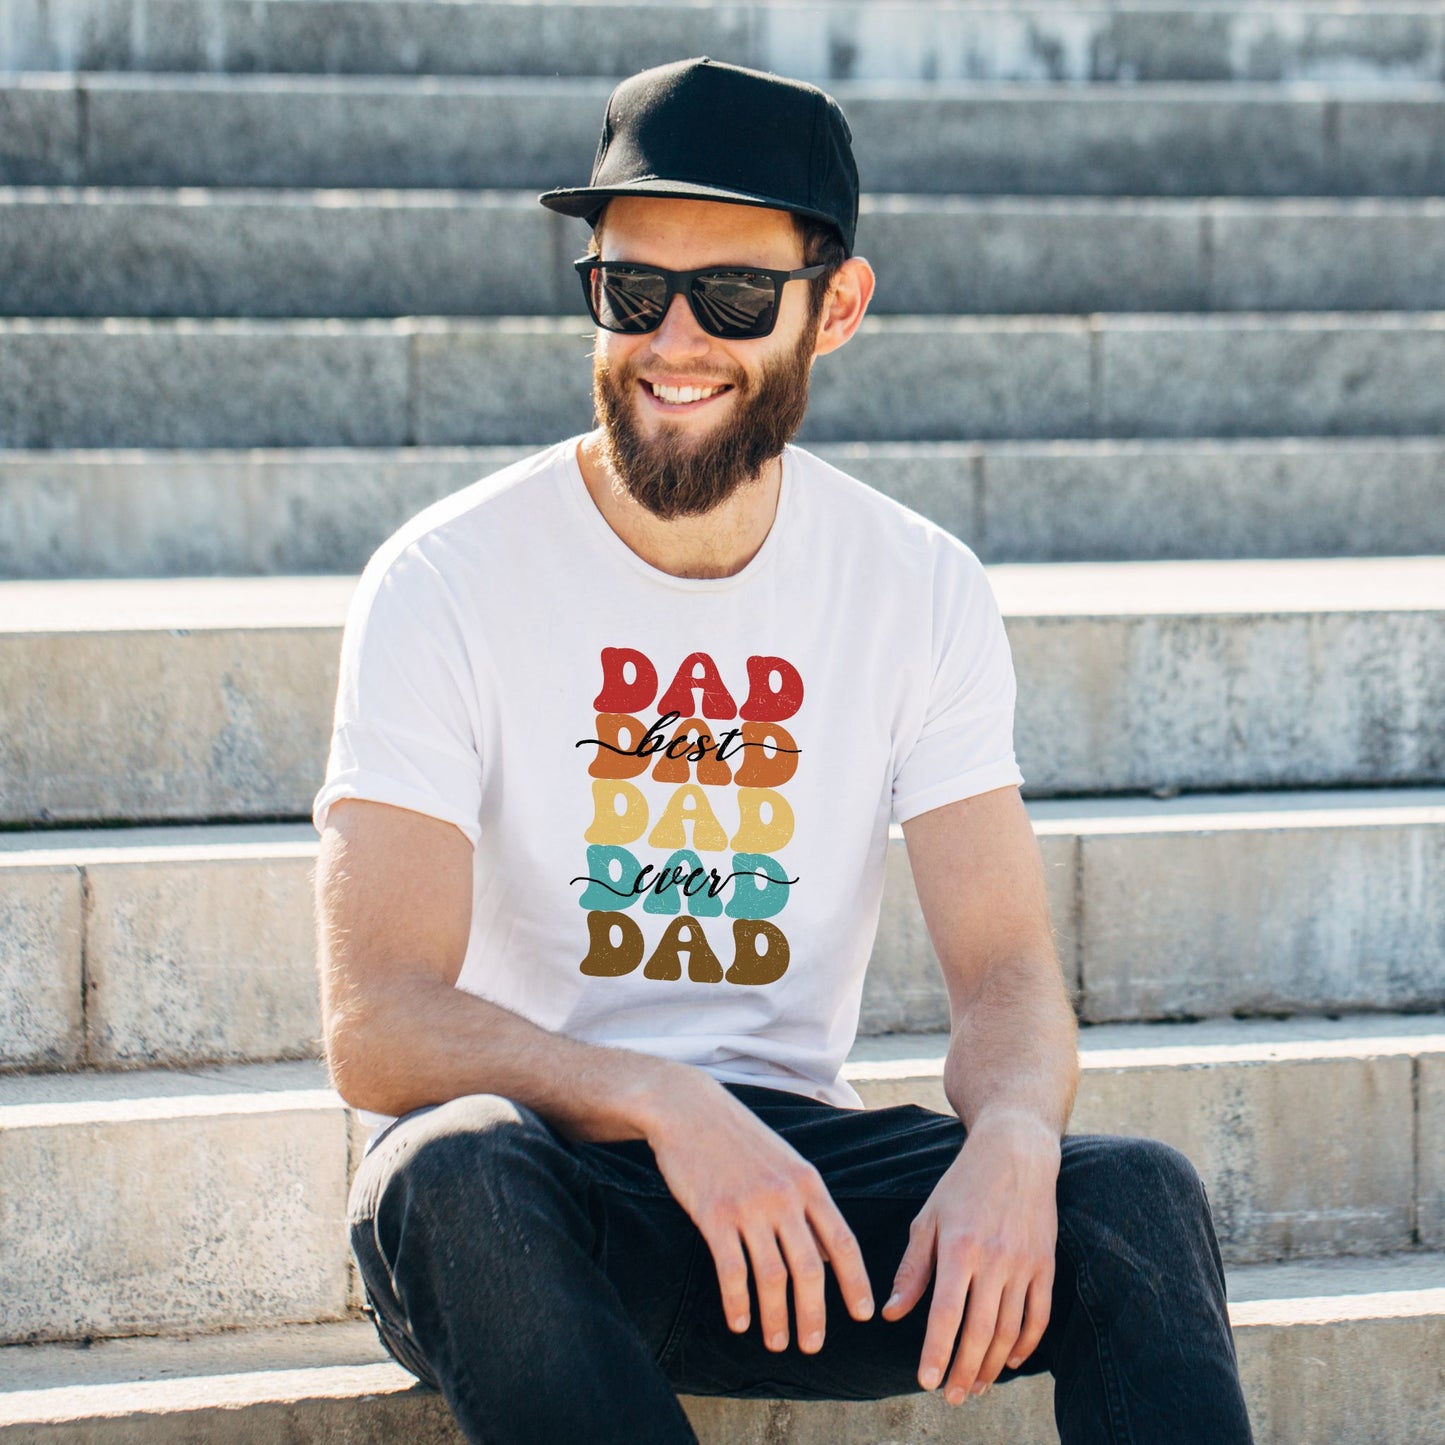 The "Best Dad Ever" Dad T-Shirt